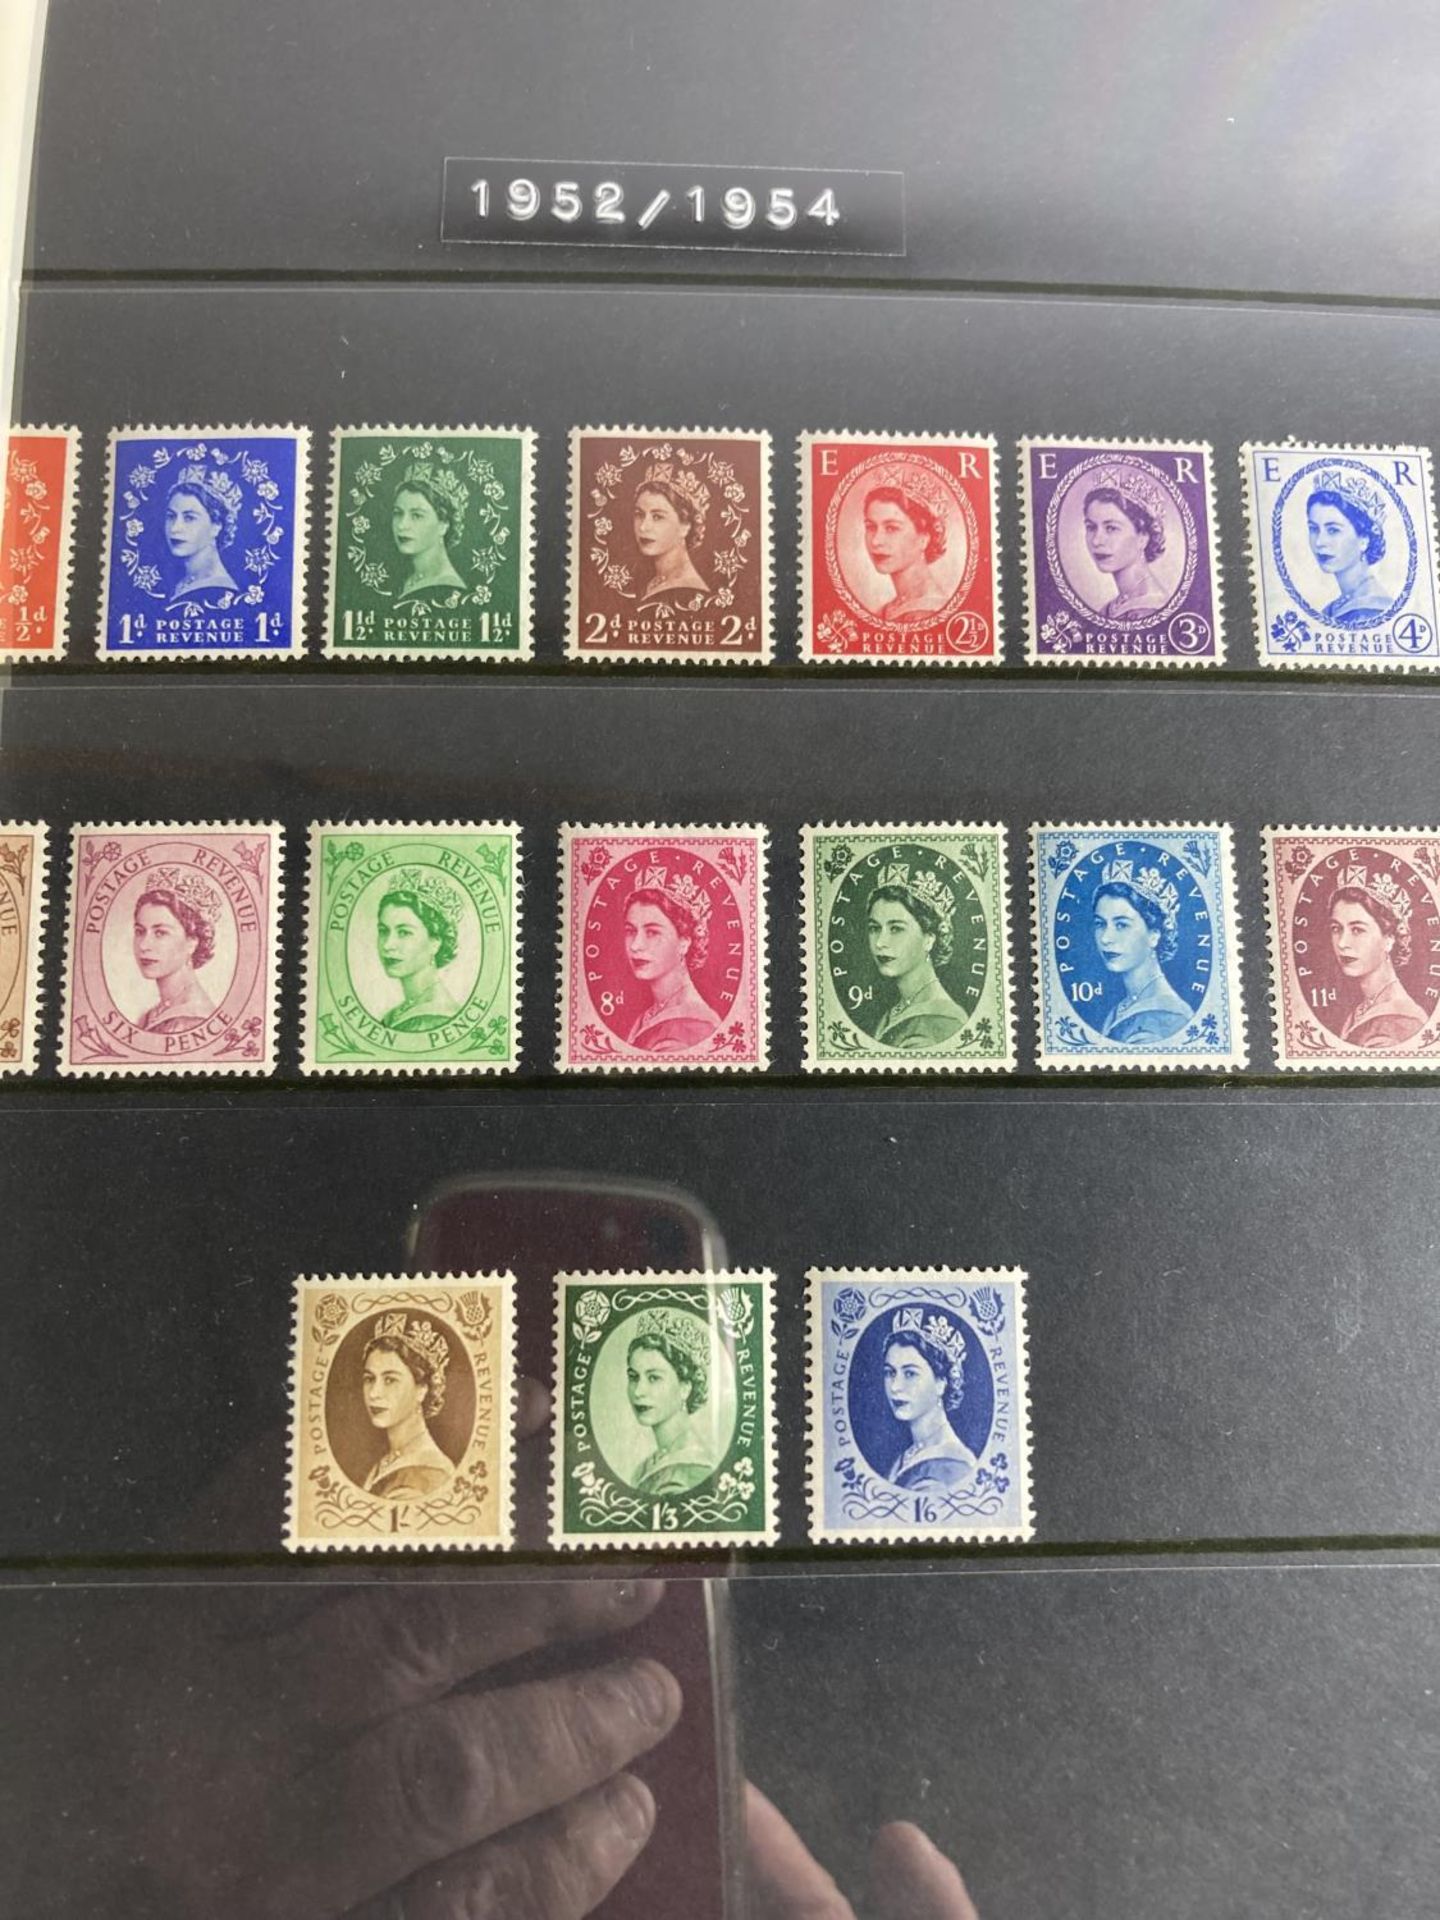 A SUPERB UNMOUNTED MINT COLLECTION OF GB , QE11 , EARLY DEFINITIVES , TO INCLUDE 1955 “CASTLES” - Image 2 of 6